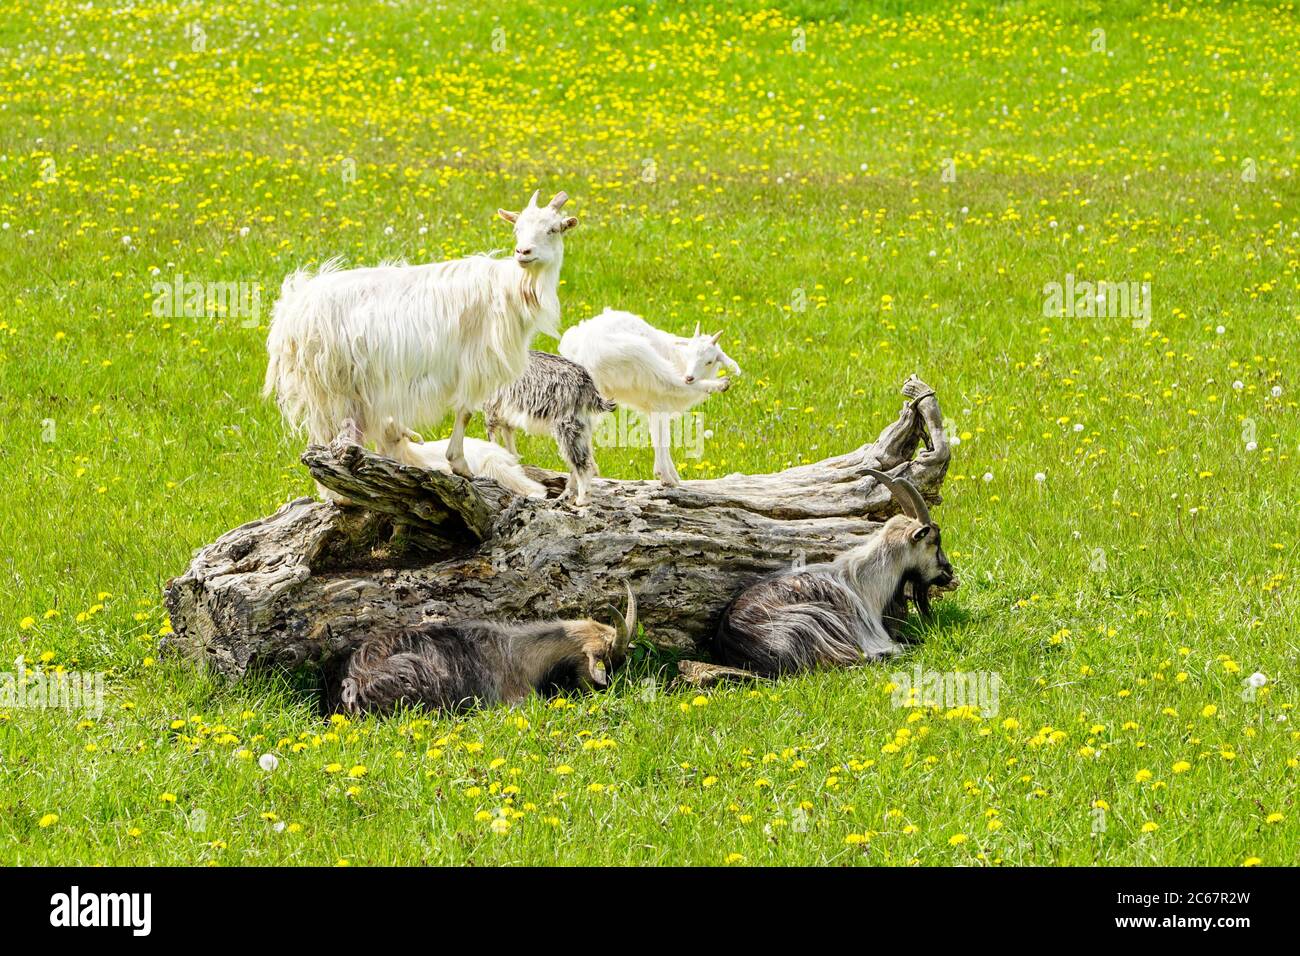 free-range goat family on a dry tree trunk in a green flowering meadow with dandelions Stock Photo